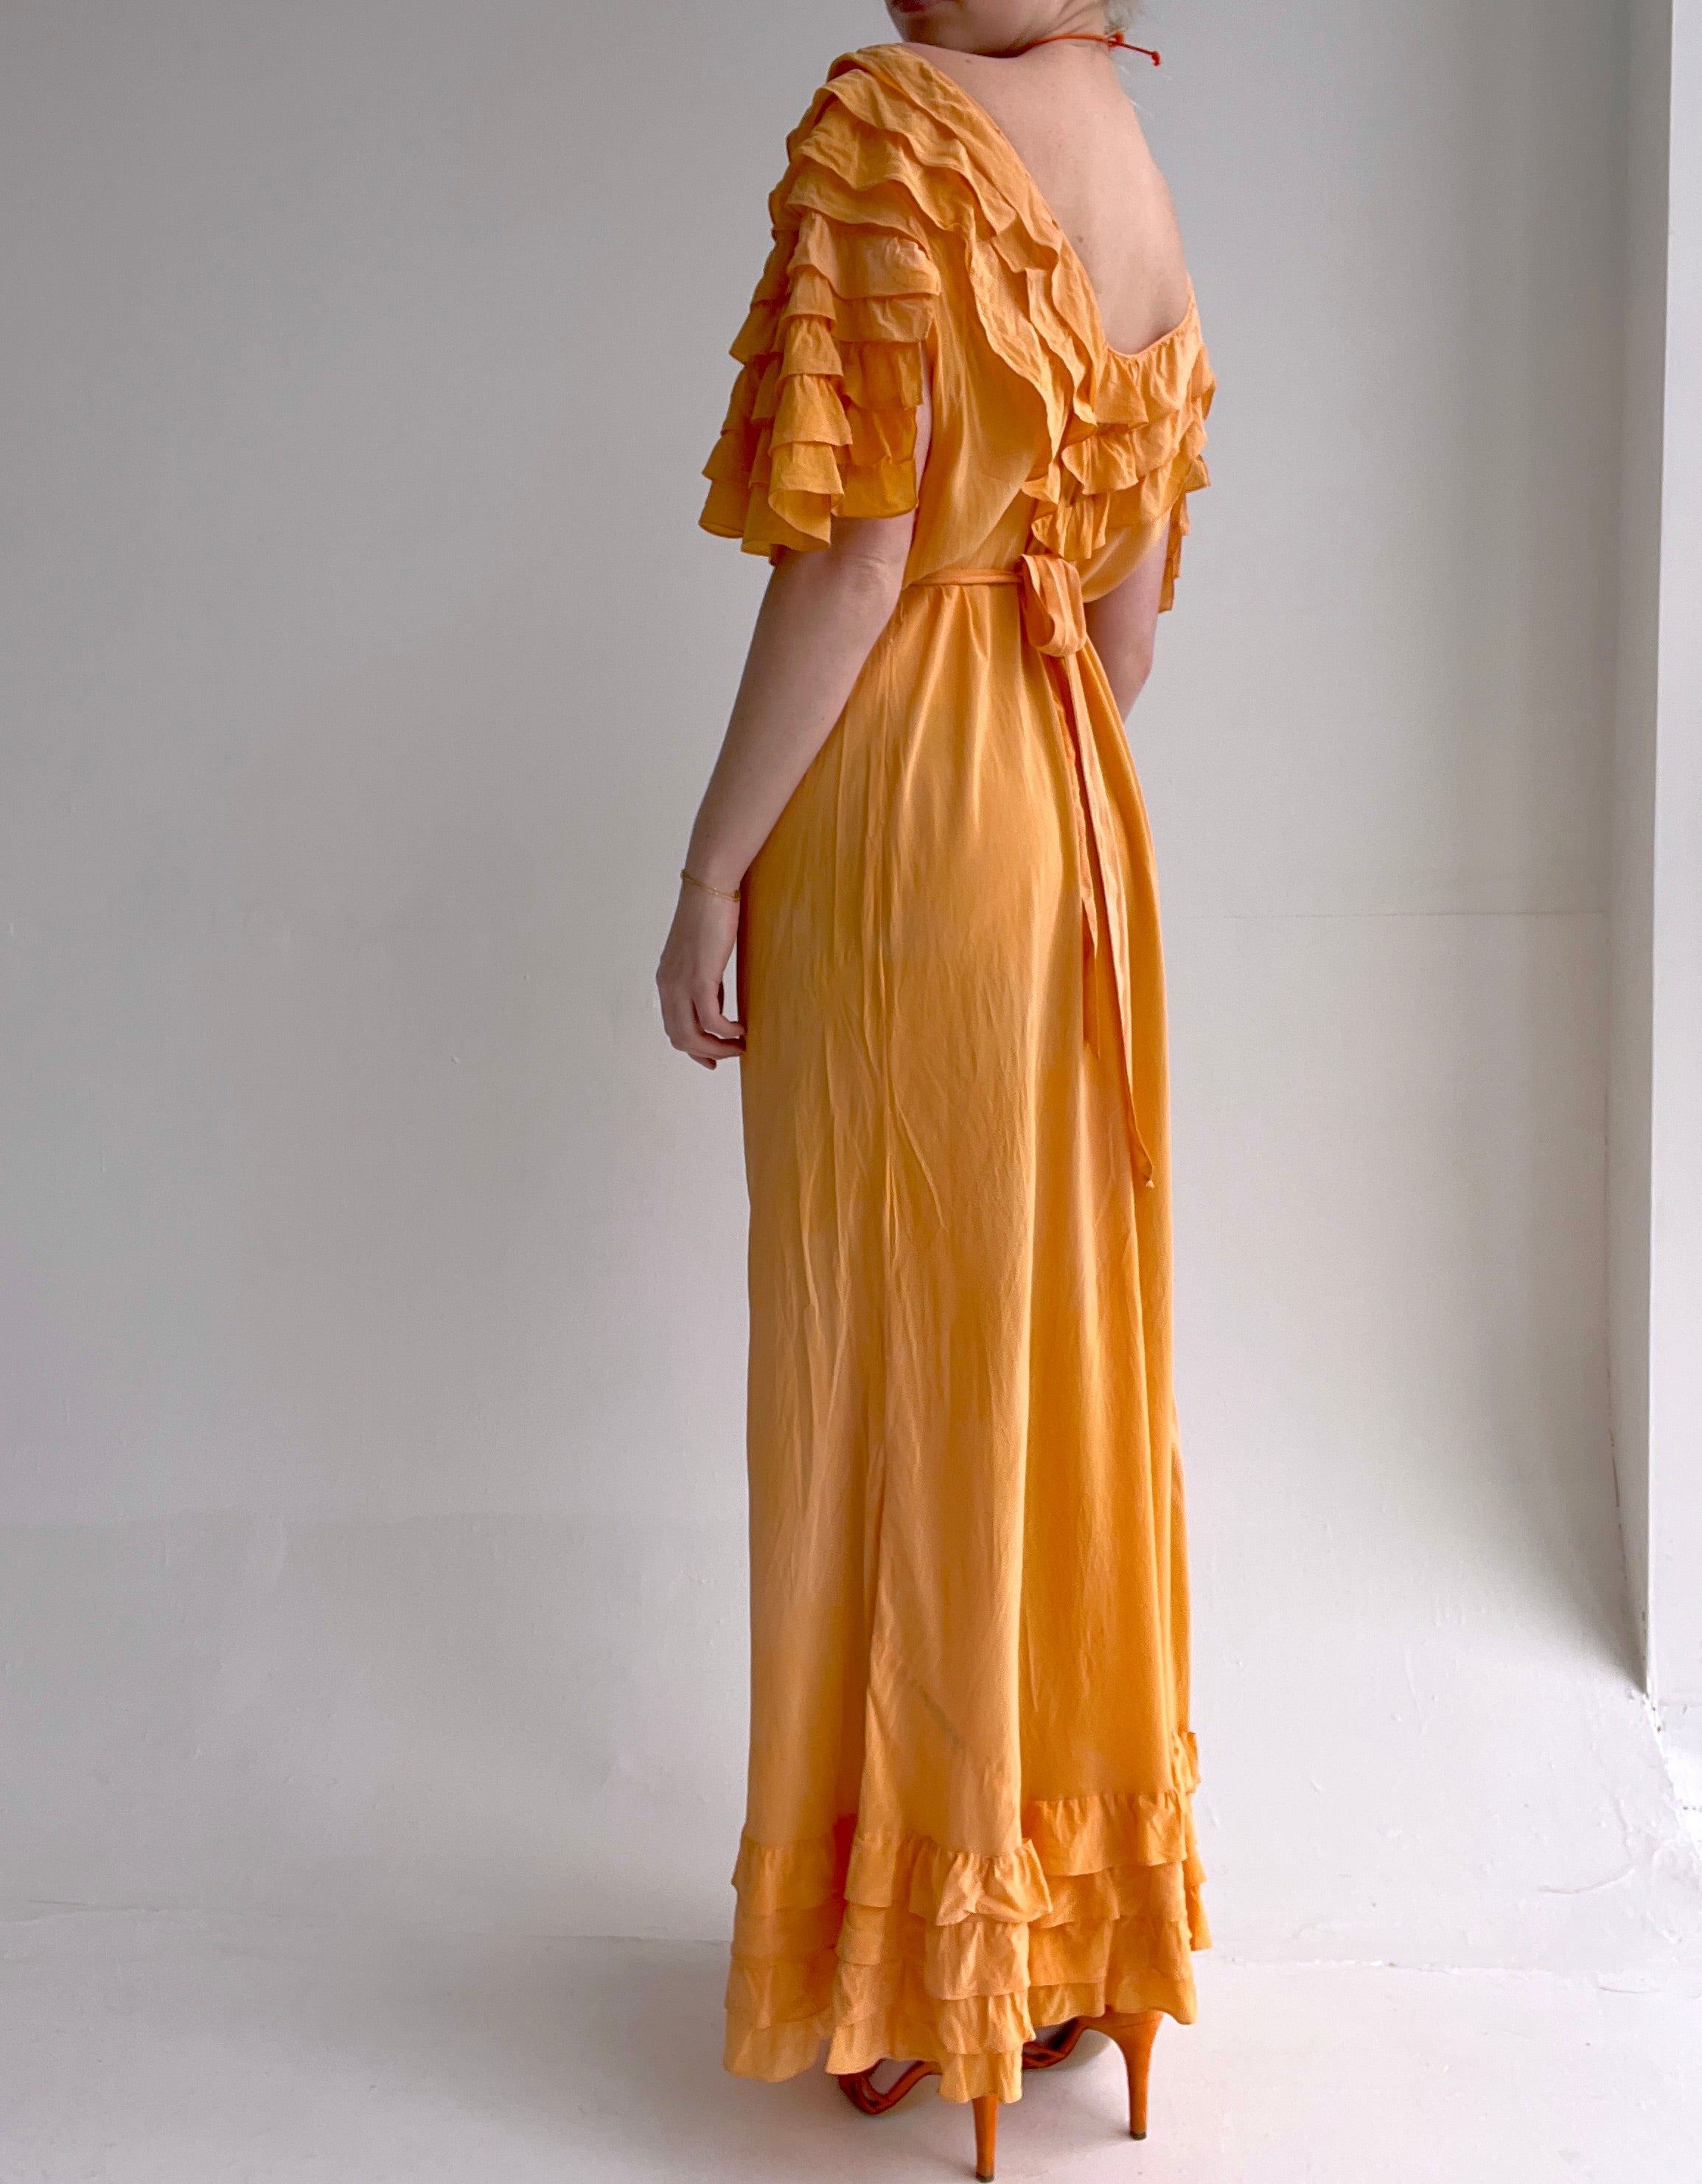 Hand Dyed Clementine Silk Dress with Ruffles